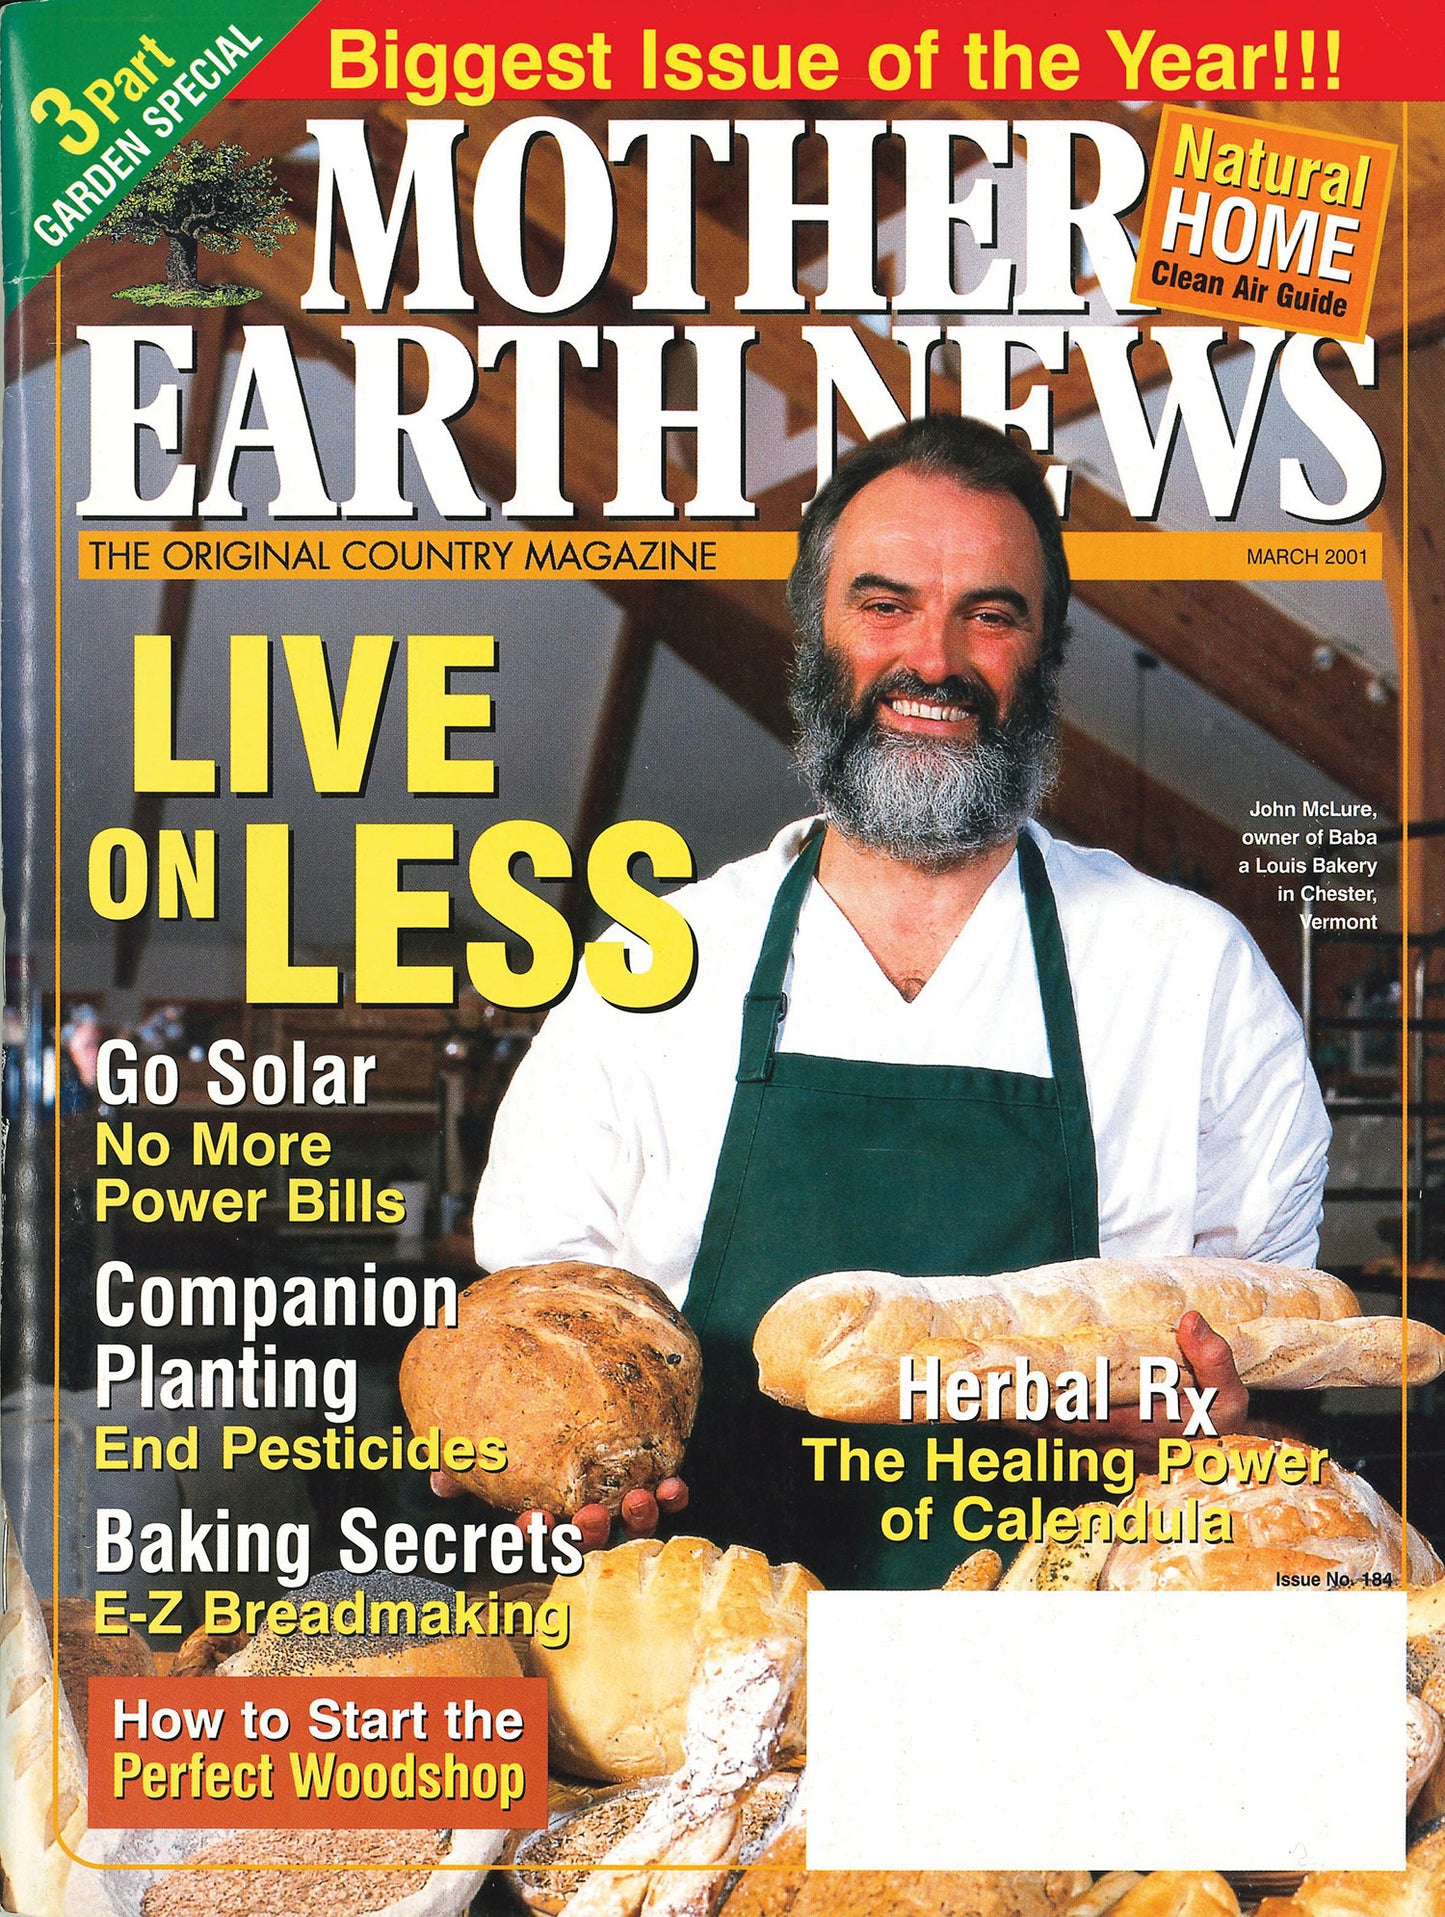 MOTHER EARTH NEWS MAGAZINE, FEBRUARY/MARCH 2001 #184